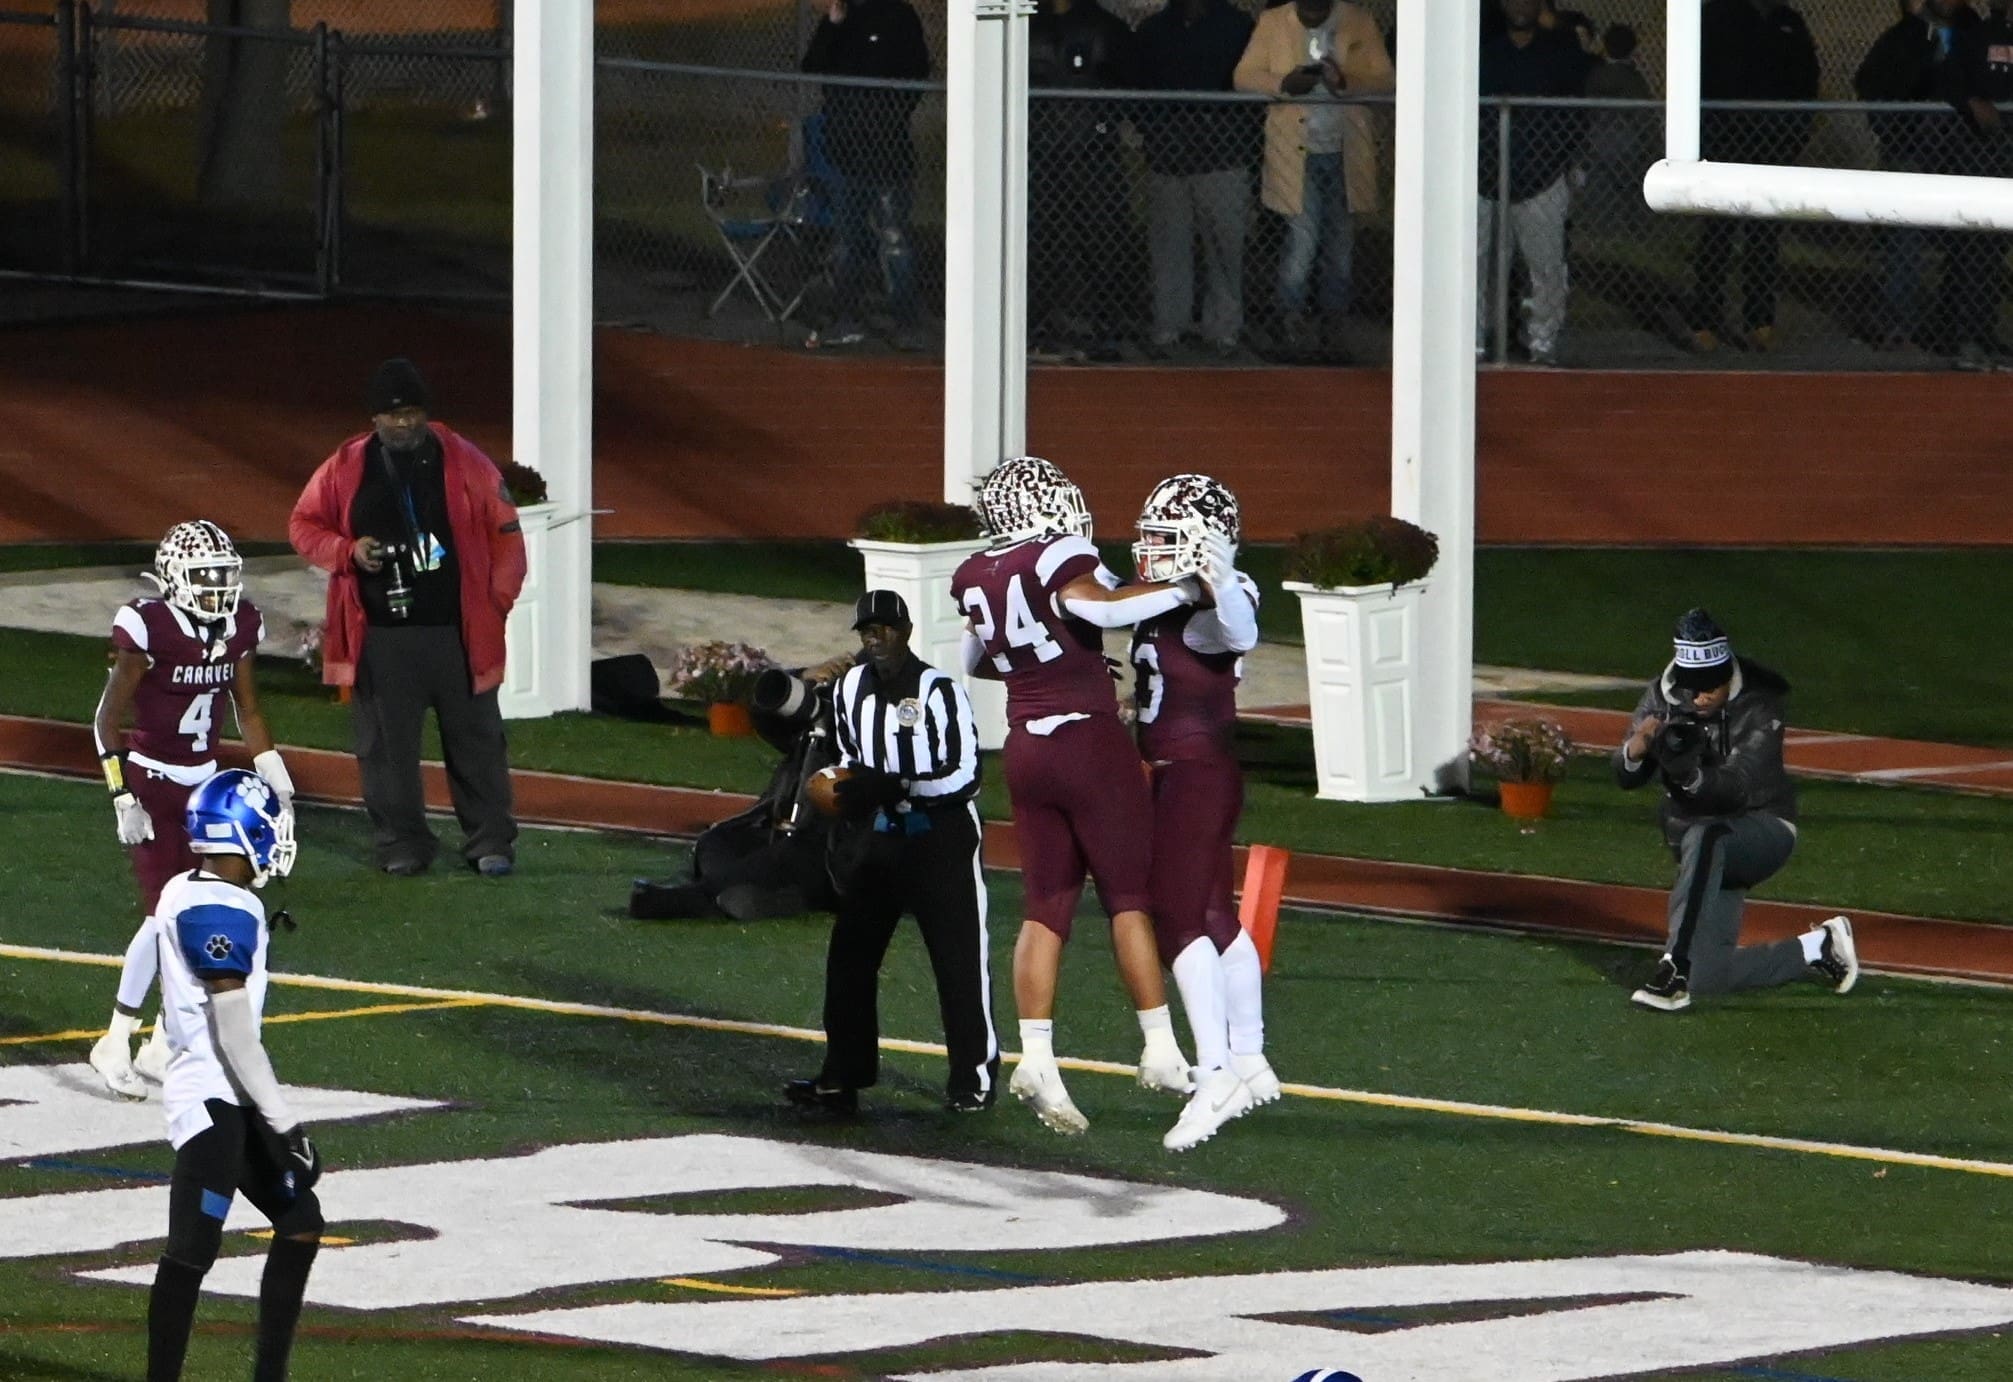 Featured image for “Caravel remains unbeaten with DIAA semifinal win”